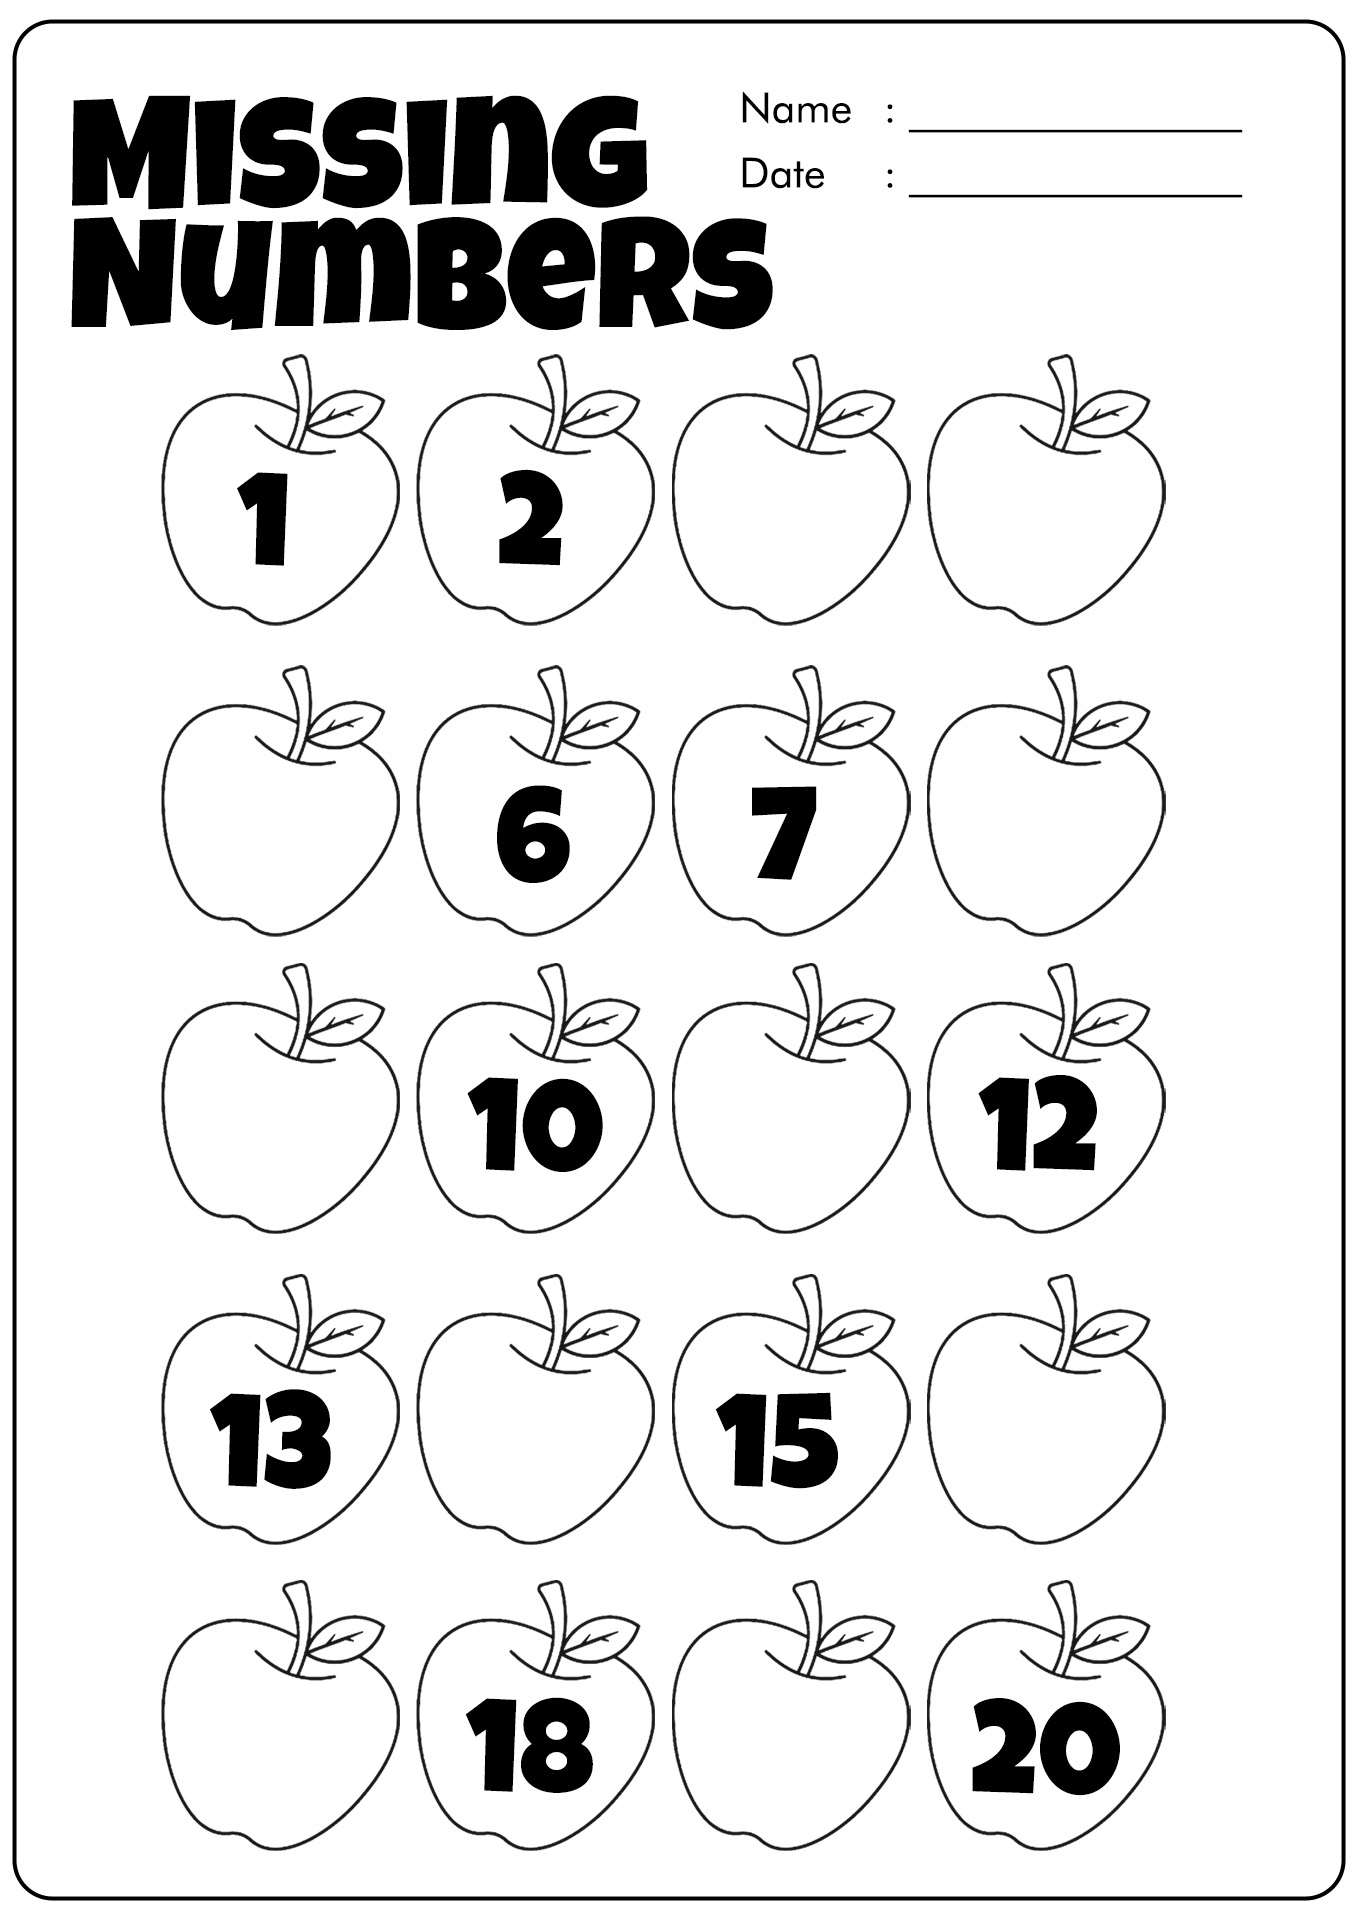 Fill in the Missing Numbers Worksheets